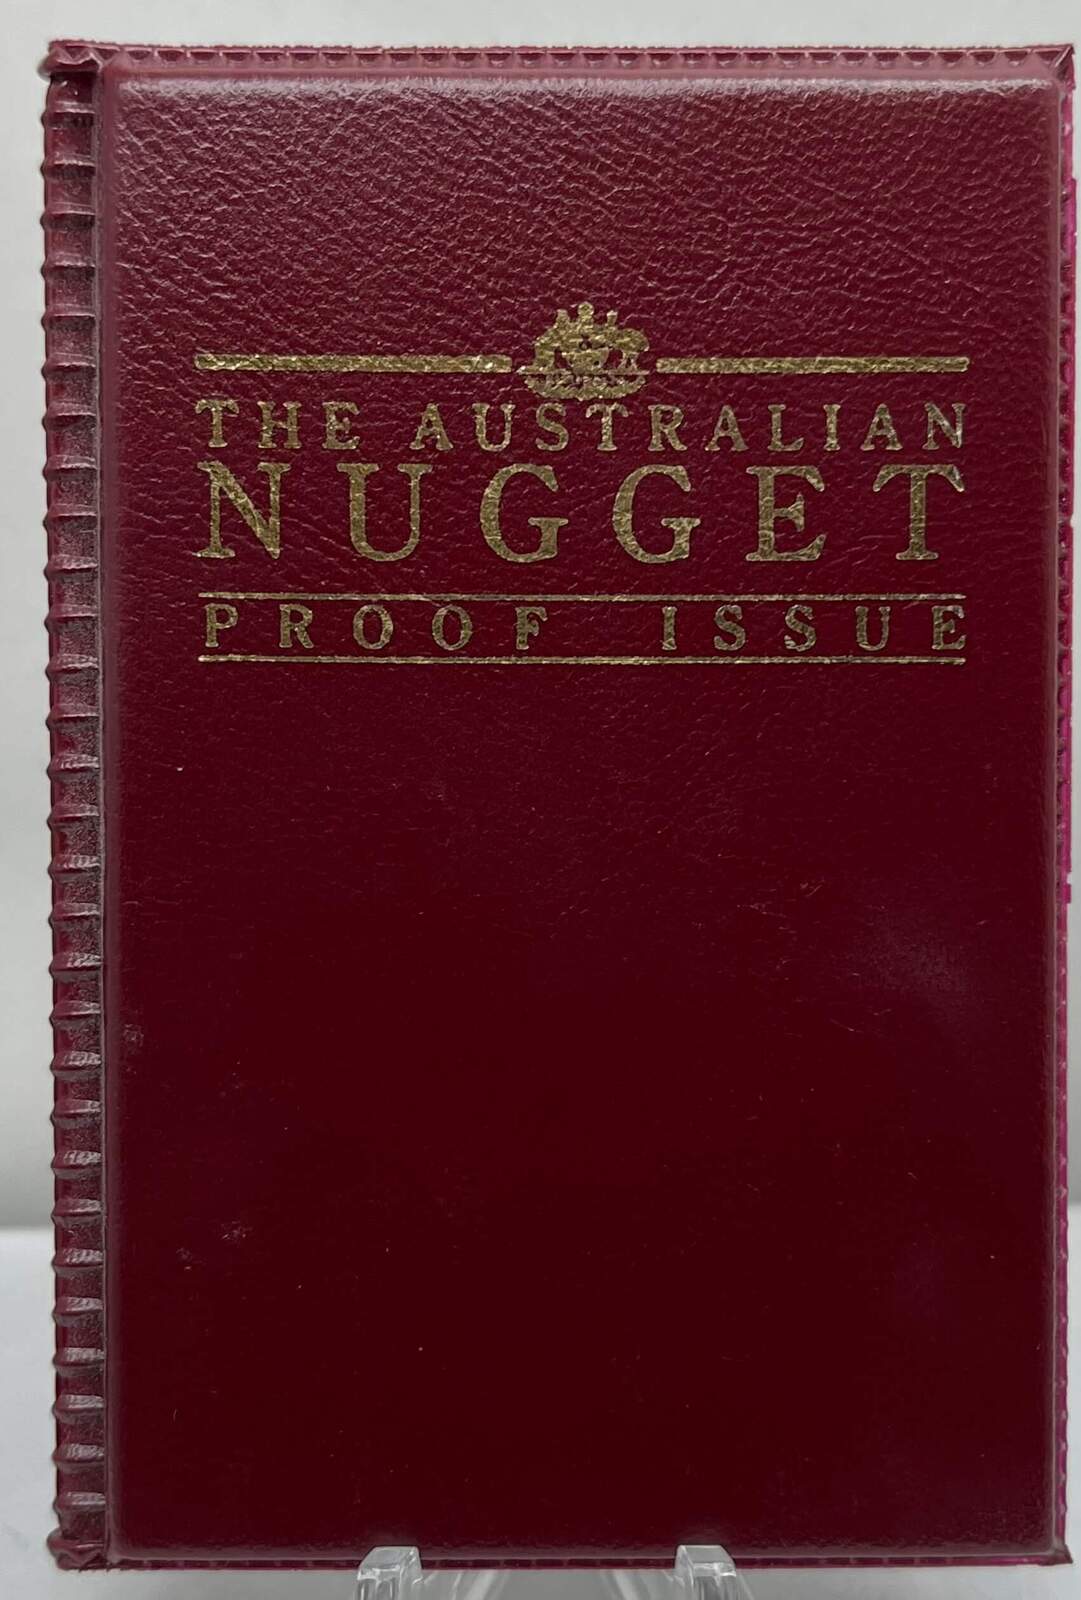 1995 Gold Tenth Ounce Proof Kangaroo Nugget product image